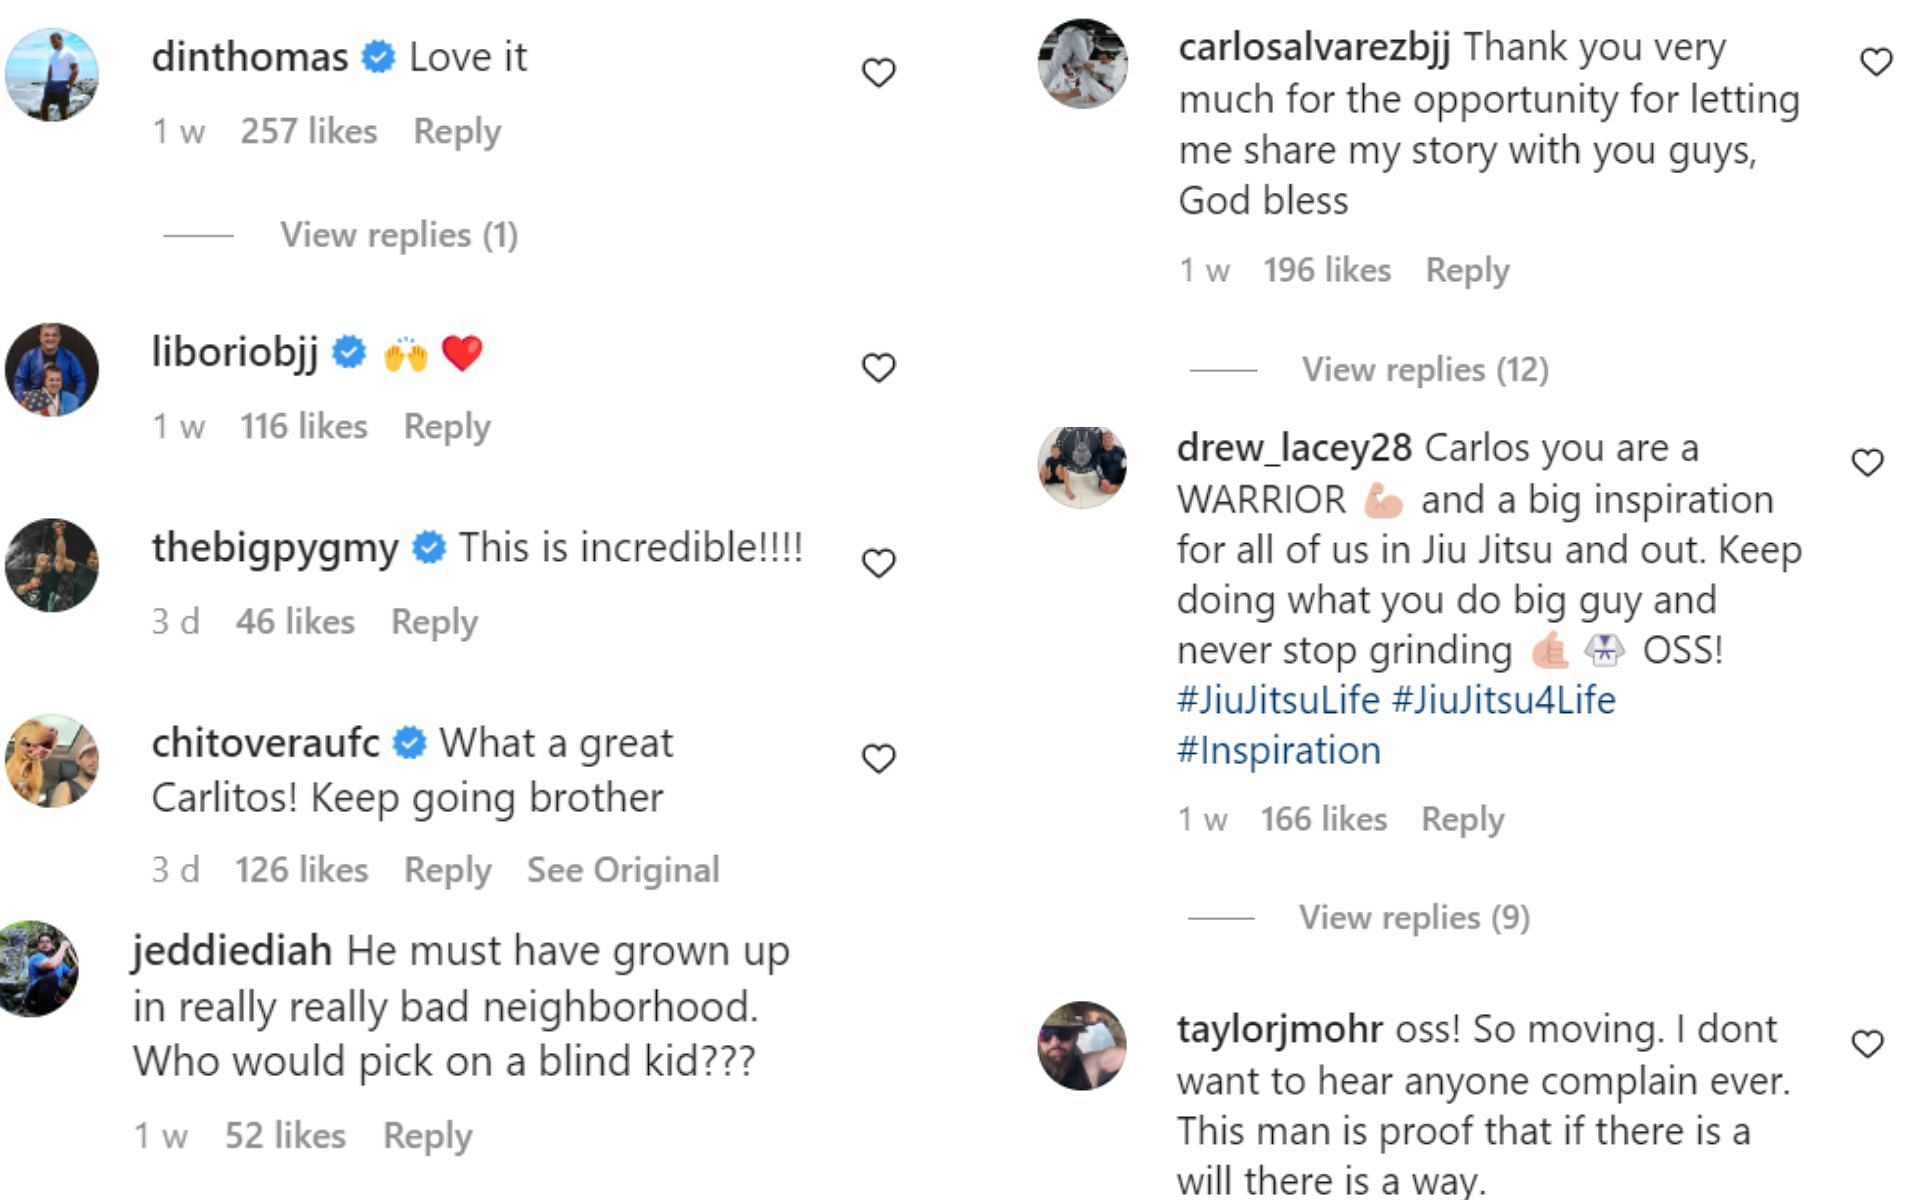 Fighters&#039; and fans&#039; reactions to Carlos Alvarez&#039;s story